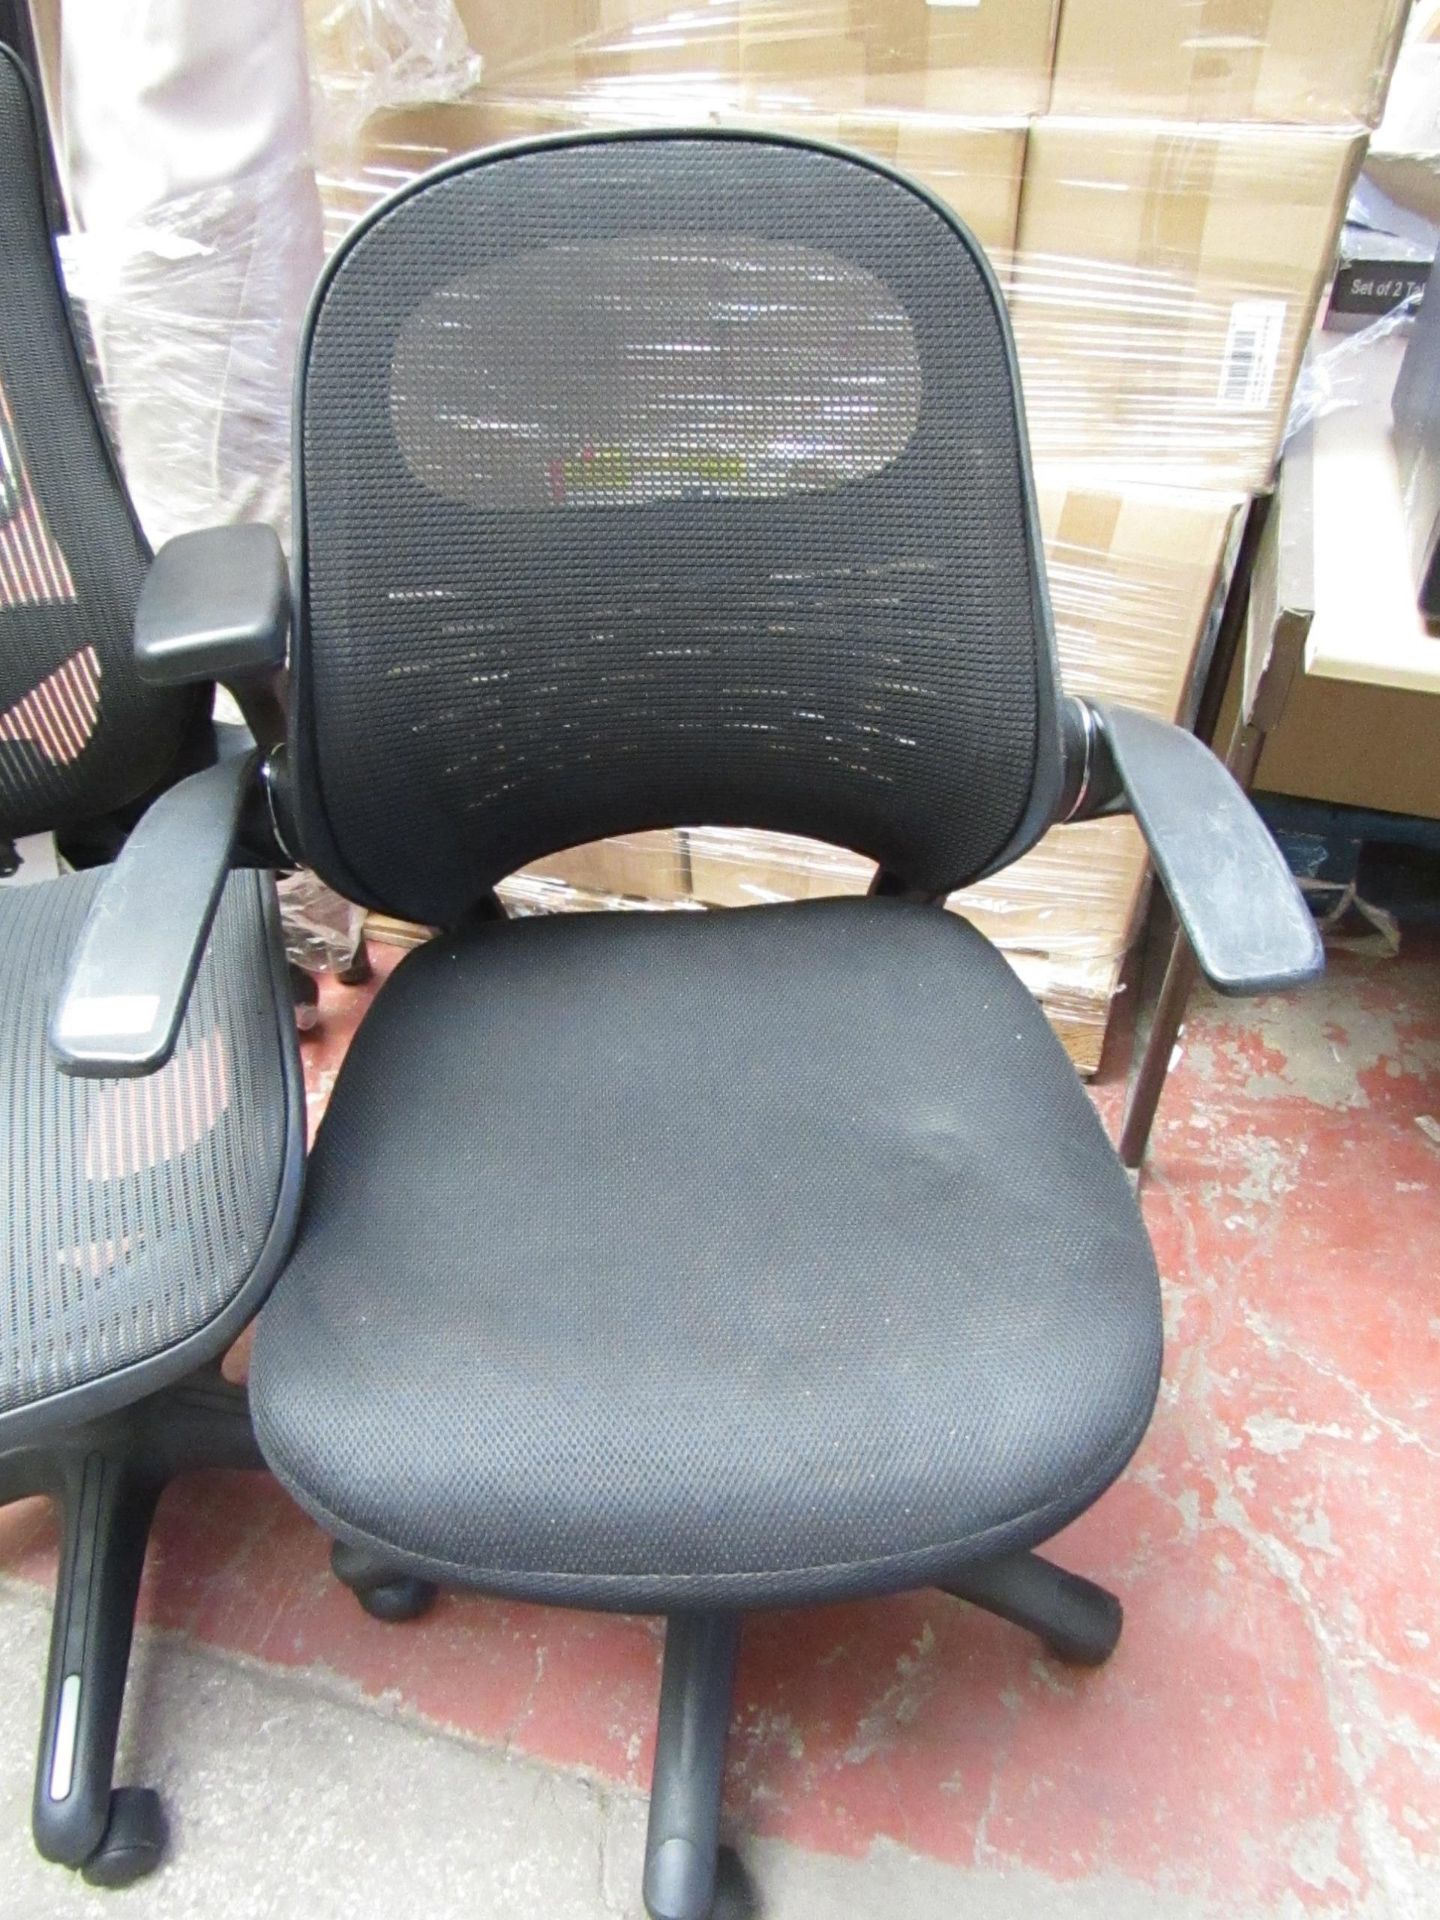 Costco Woven fabric office chair.